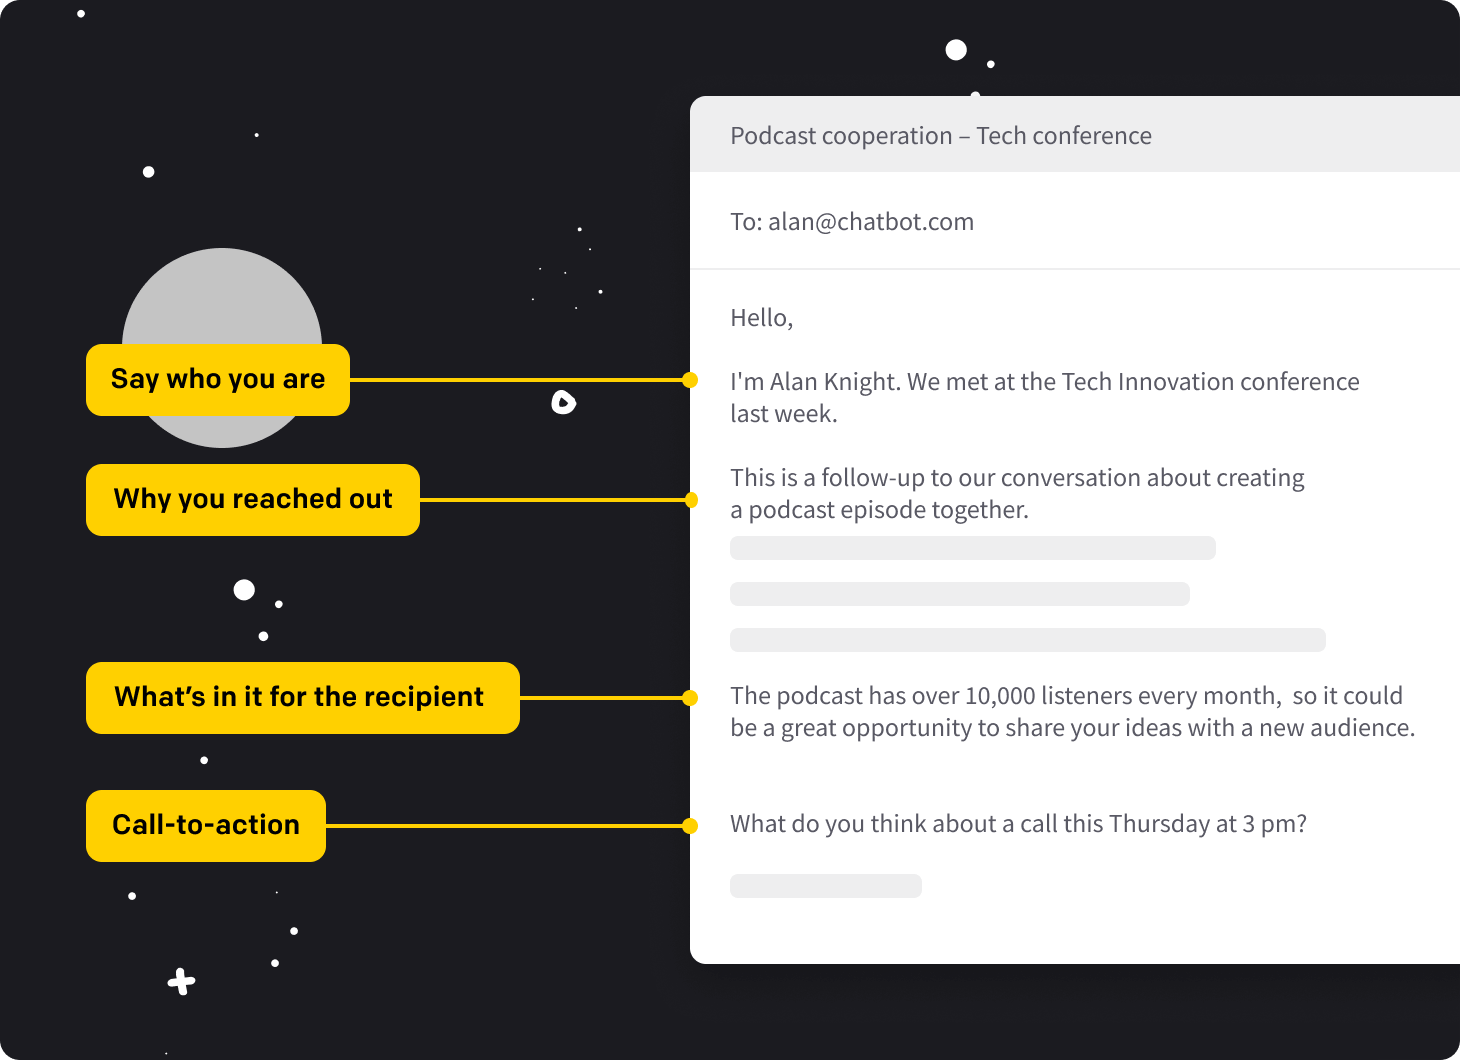 Email with a clear structure: say who you are, why you reach out, what’s in it for the recipient, call to action. Background with stars and the moon.